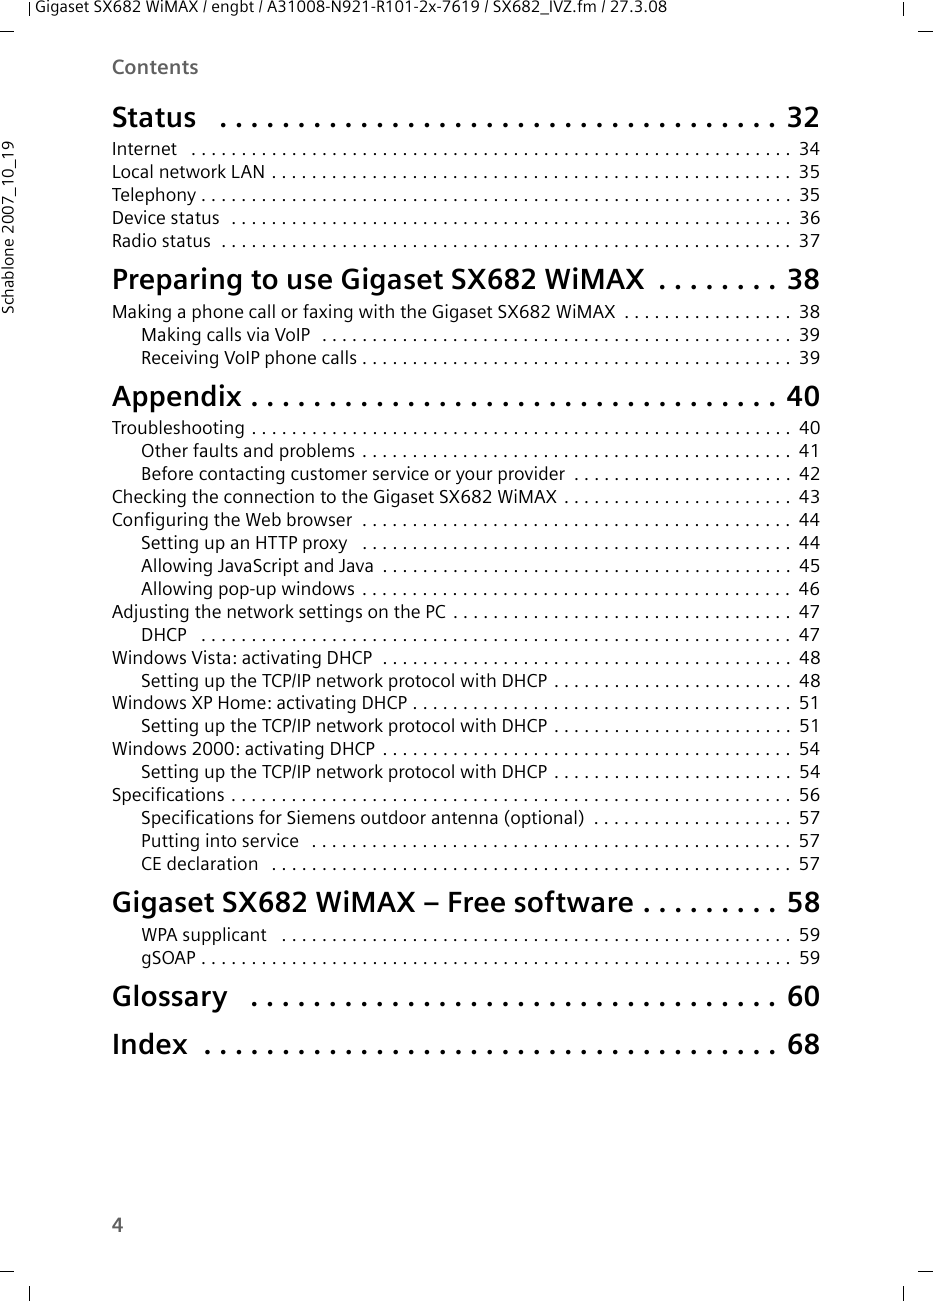 4ContentsGigaset SX682 WiMAX / engbt / A31008-N921-R101-2x-7619 / SX682_IVZ.fm / 27.3.08Schablone 2007_10_19Status  . . . . . . . . . . . . . . . . . . . . . . . . . . . . . . . . . . . . 32Internet  . . . . . . . . . . . . . . . . . . . . . . . . . . . . . . . . . . . . . . . . . . . . . . . . . . . . . . . . . . . .34Local network LAN . . . . . . . . . . . . . . . . . . . . . . . . . . . . . . . . . . . . . . . . . . . . . . . . . . . . 35Telephony . . . . . . . . . . . . . . . . . . . . . . . . . . . . . . . . . . . . . . . . . . . . . . . . . . . . . . . . . . . 35Device status  . . . . . . . . . . . . . . . . . . . . . . . . . . . . . . . . . . . . . . . . . . . . . . . . . . . . . . . . 36Radio status  . . . . . . . . . . . . . . . . . . . . . . . . . . . . . . . . . . . . . . . . . . . . . . . . . . . . . . . . . 37Preparing to use Gigaset SX682 WiMAX . . . . . . . . 38Making a phone call or faxing with the Gigaset SX682 WiMAX . . . . . . . . . . . . . . . . . 38Making calls via VoIP  . . . . . . . . . . . . . . . . . . . . . . . . . . . . . . . . . . . . . . . . . . . . . . . 39Receiving VoIP phone calls . . . . . . . . . . . . . . . . . . . . . . . . . . . . . . . . . . . . . . . . . . . 39Appendix . . . . . . . . . . . . . . . . . . . . . . . . . . . . . . . . . . 40Troubleshooting . . . . . . . . . . . . . . . . . . . . . . . . . . . . . . . . . . . . . . . . . . . . . . . . . . . . . . 40Other faults and problems . . . . . . . . . . . . . . . . . . . . . . . . . . . . . . . . . . . . . . . . . . . 41Before contacting customer service or your provider . . . . . . . . . . . . . . . . . . . . . . 42Checking the connection to the Gigaset SX682 WiMAX . . . . . . . . . . . . . . . . . . . . . . . 43Configuring the Web browser  . . . . . . . . . . . . . . . . . . . . . . . . . . . . . . . . . . . . . . . . . . . 44Setting up an HTTP proxy  . . . . . . . . . . . . . . . . . . . . . . . . . . . . . . . . . . . . . . . . . . . 44Allowing JavaScript and Java . . . . . . . . . . . . . . . . . . . . . . . . . . . . . . . . . . . . . . . . . 45Allowing pop-up windows . . . . . . . . . . . . . . . . . . . . . . . . . . . . . . . . . . . . . . . . . . . 46Adjusting the network settings on the PC . . . . . . . . . . . . . . . . . . . . . . . . . . . . . . . . . . 47DHCP  . . . . . . . . . . . . . . . . . . . . . . . . . . . . . . . . . . . . . . . . . . . . . . . . . . . . . . . . . . . 47Windows Vista: activating DHCP  . . . . . . . . . . . . . . . . . . . . . . . . . . . . . . . . . . . . . . . . . 48Setting up the TCP/IP network protocol with DHCP . . . . . . . . . . . . . . . . . . . . . . . . 48Windows XP Home: activating DHCP . . . . . . . . . . . . . . . . . . . . . . . . . . . . . . . . . . . . . . 51Setting up the TCP/IP network protocol with DHCP . . . . . . . . . . . . . . . . . . . . . . . . 51Windows 2000: activating DHCP . . . . . . . . . . . . . . . . . . . . . . . . . . . . . . . . . . . . . . . . . 54Setting up the TCP/IP network protocol with DHCP . . . . . . . . . . . . . . . . . . . . . . . . 54Specifications . . . . . . . . . . . . . . . . . . . . . . . . . . . . . . . . . . . . . . . . . . . . . . . . . . . . . . . . 56Specifications for Siemens outdoor antenna (optional) . . . . . . . . . . . . . . . . . . . . 57Putting into service  . . . . . . . . . . . . . . . . . . . . . . . . . . . . . . . . . . . . . . . . . . . . . . . . 57CE declaration  . . . . . . . . . . . . . . . . . . . . . . . . . . . . . . . . . . . . . . . . . . . . . . . . . . . . 57Gigaset SX682 WiMAX – Free software . . . . . . . . . 58WPA supplicant  . . . . . . . . . . . . . . . . . . . . . . . . . . . . . . . . . . . . . . . . . . . . . . . . . . . 59gSOAP . . . . . . . . . . . . . . . . . . . . . . . . . . . . . . . . . . . . . . . . . . . . . . . . . . . . . . . . . . . 59Glossary  . . . . . . . . . . . . . . . . . . . . . . . . . . . . . . . . . . 60Index  . . . . . . . . . . . . . . . . . . . . . . . . . . . . . . . . . . . . . 68